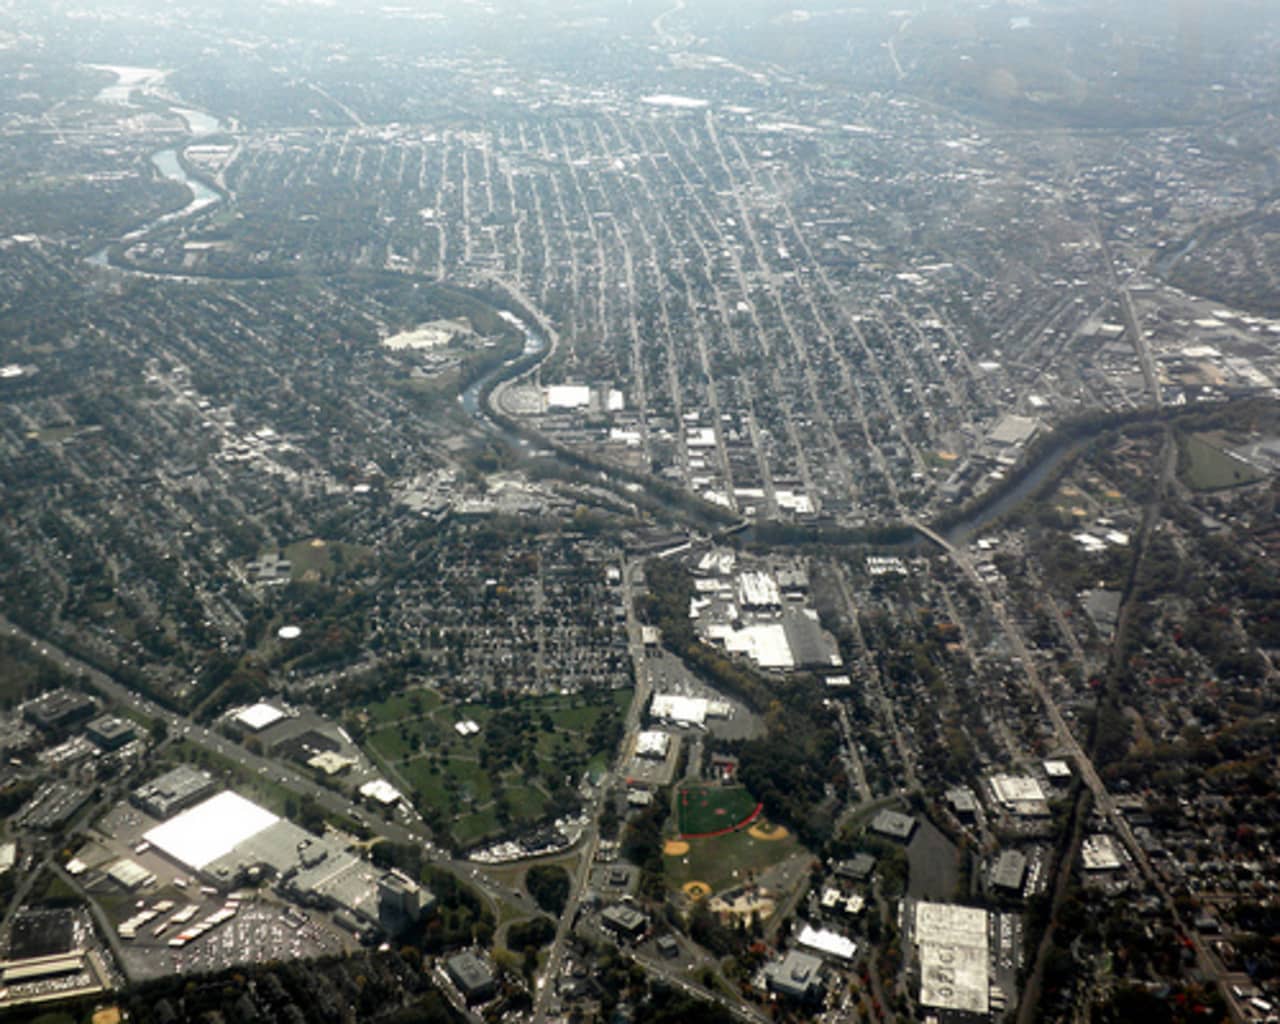 An aerial view of Fair Lawn, Paterson, and the Passaic River.